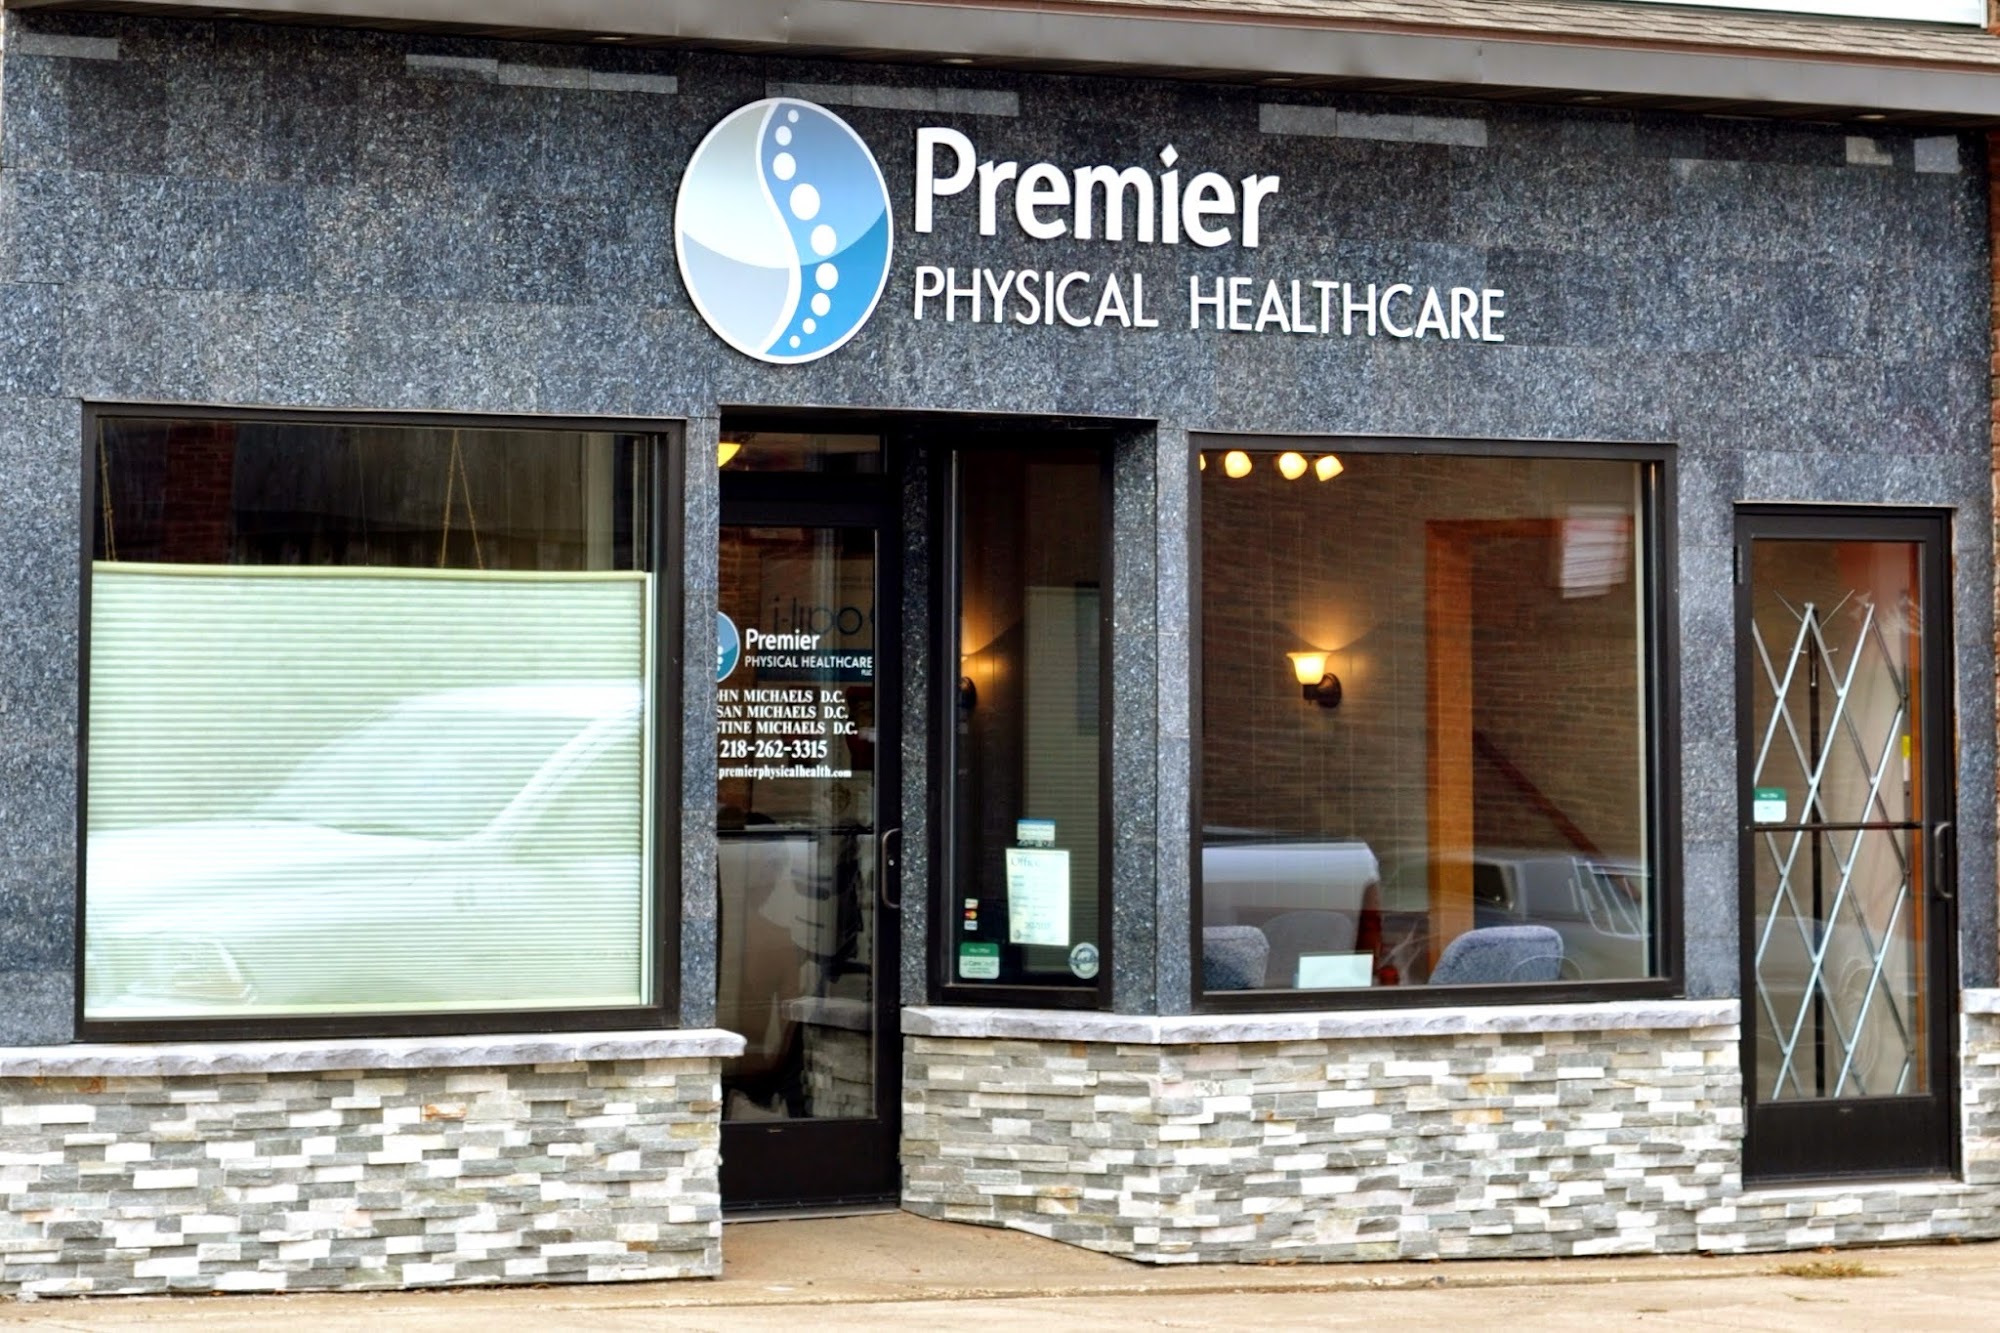 Premier Physical Healthcare